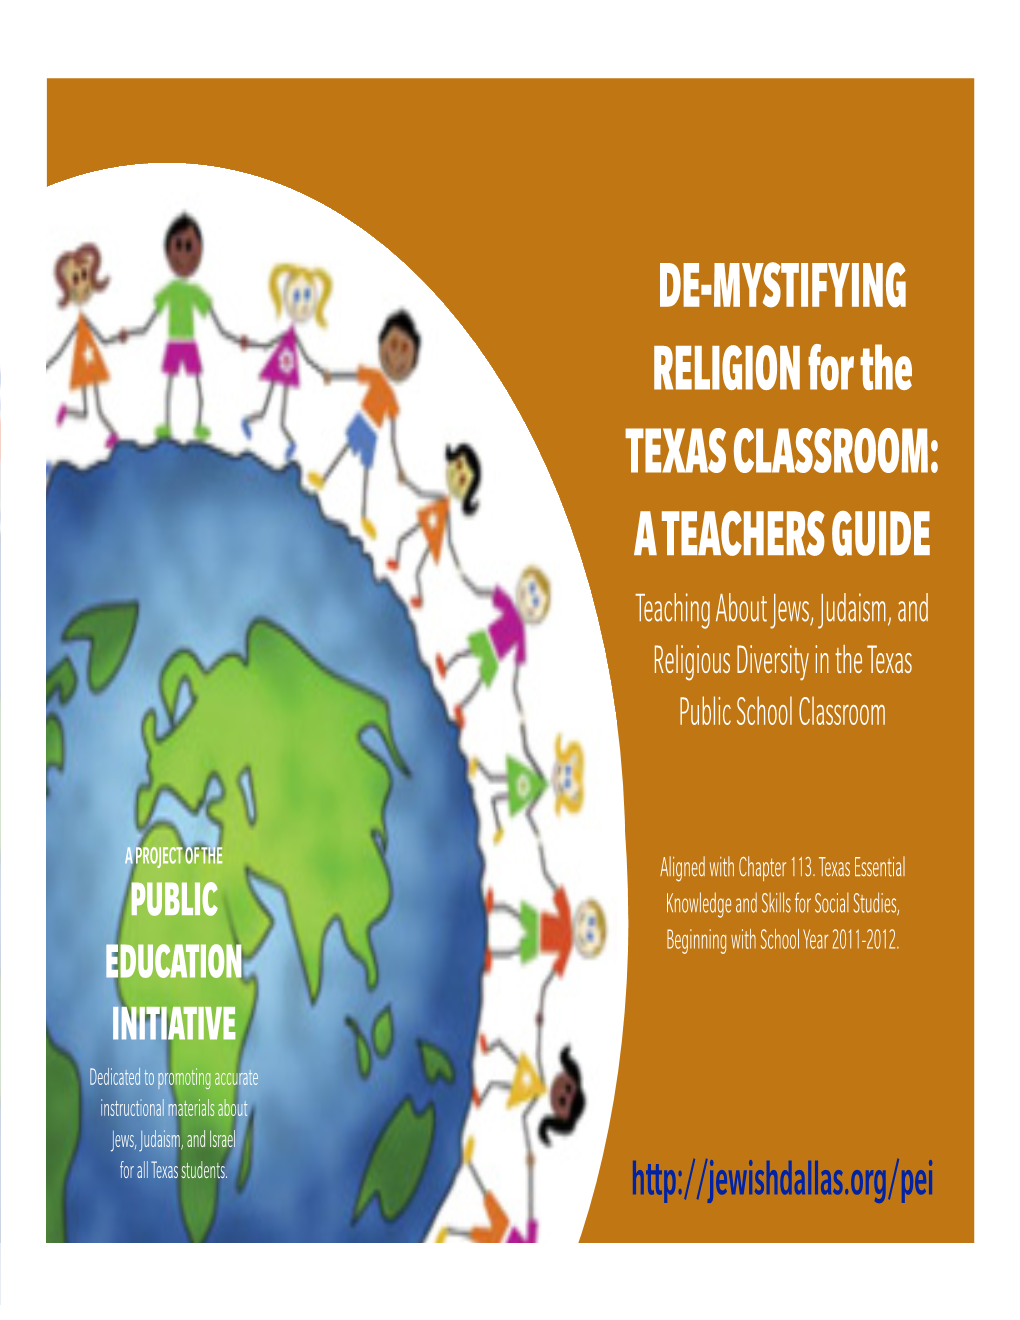 DE-MYSTIFYING RELIGION for the TEXAS CLASSROOM: a TEACHERS GUIDE Teaching About Jews, Judaism, and Religious Diversity in the Texas Public School Classroom